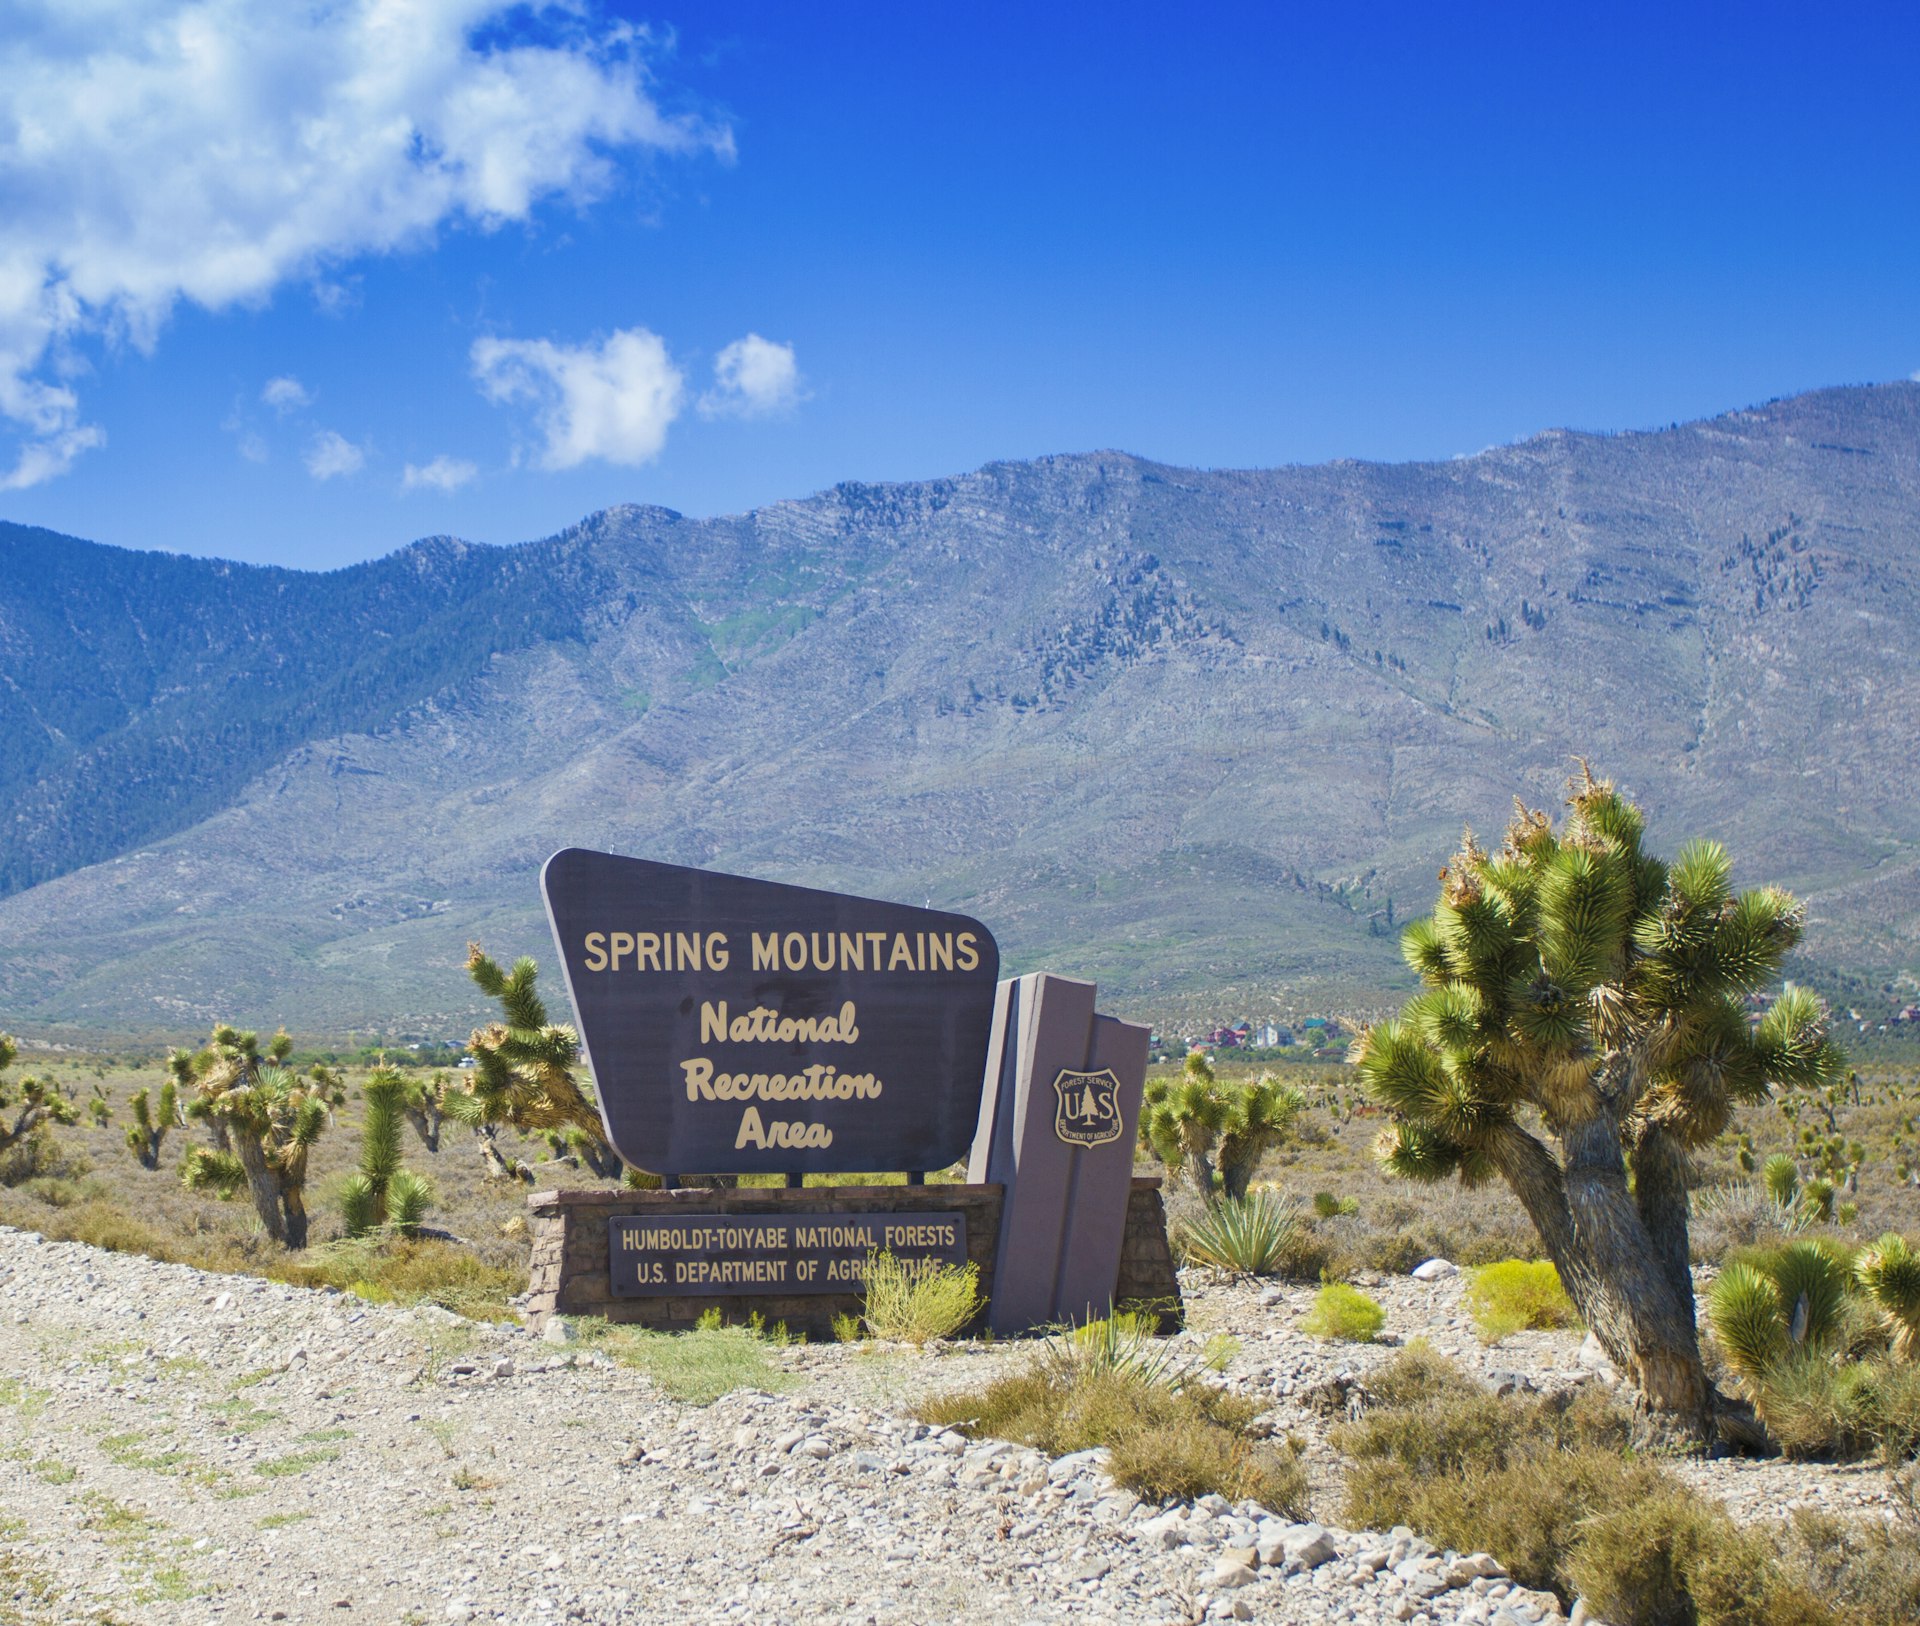 A photo of Spring Mountains sign in Nevada